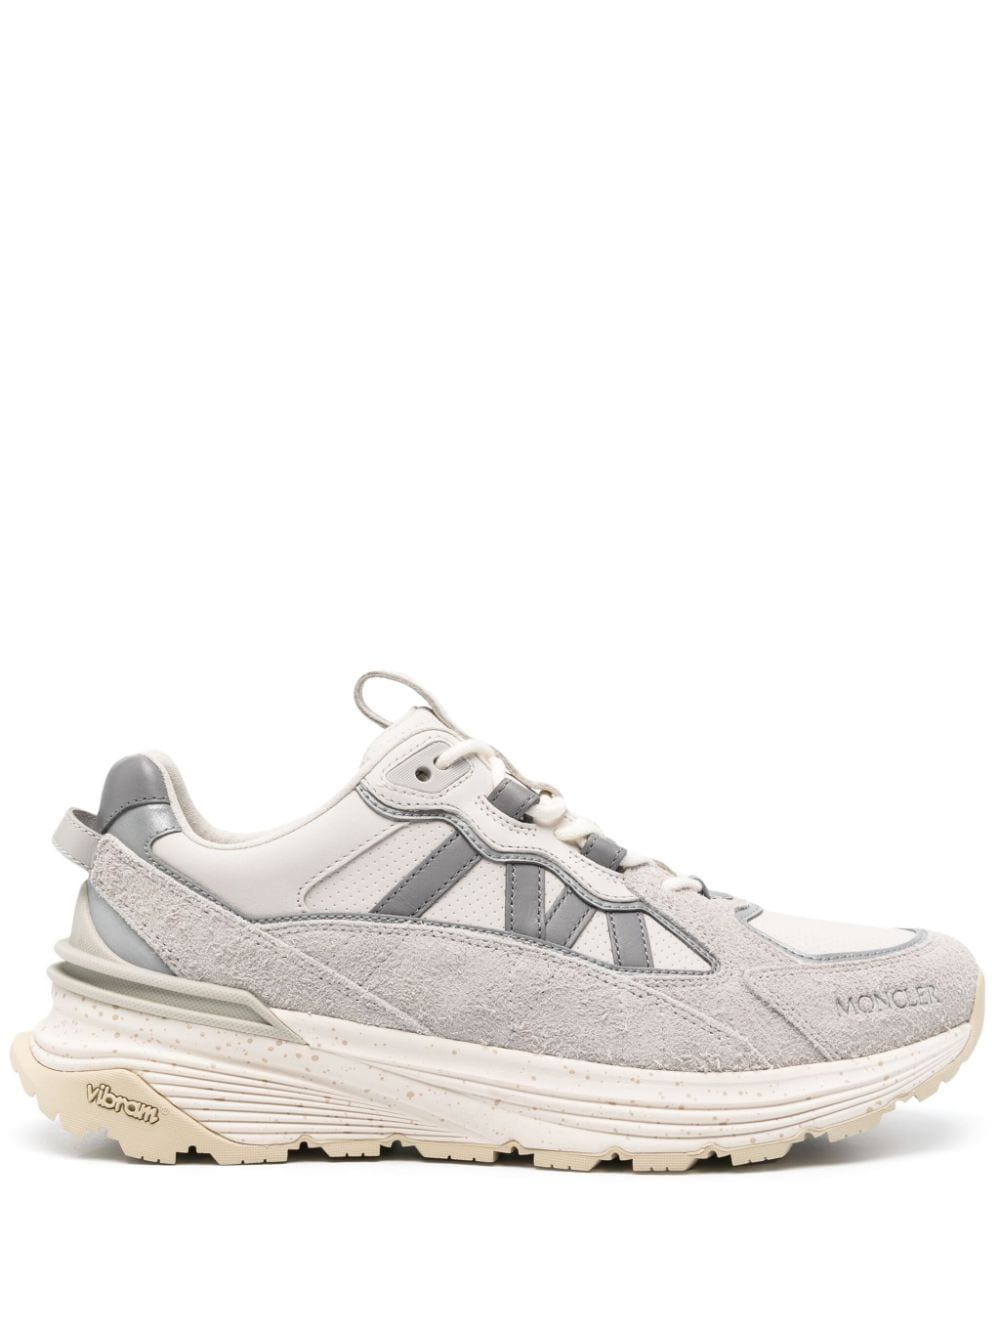 Moncler Lite Runner lace-up sneakers - Grey von Moncler